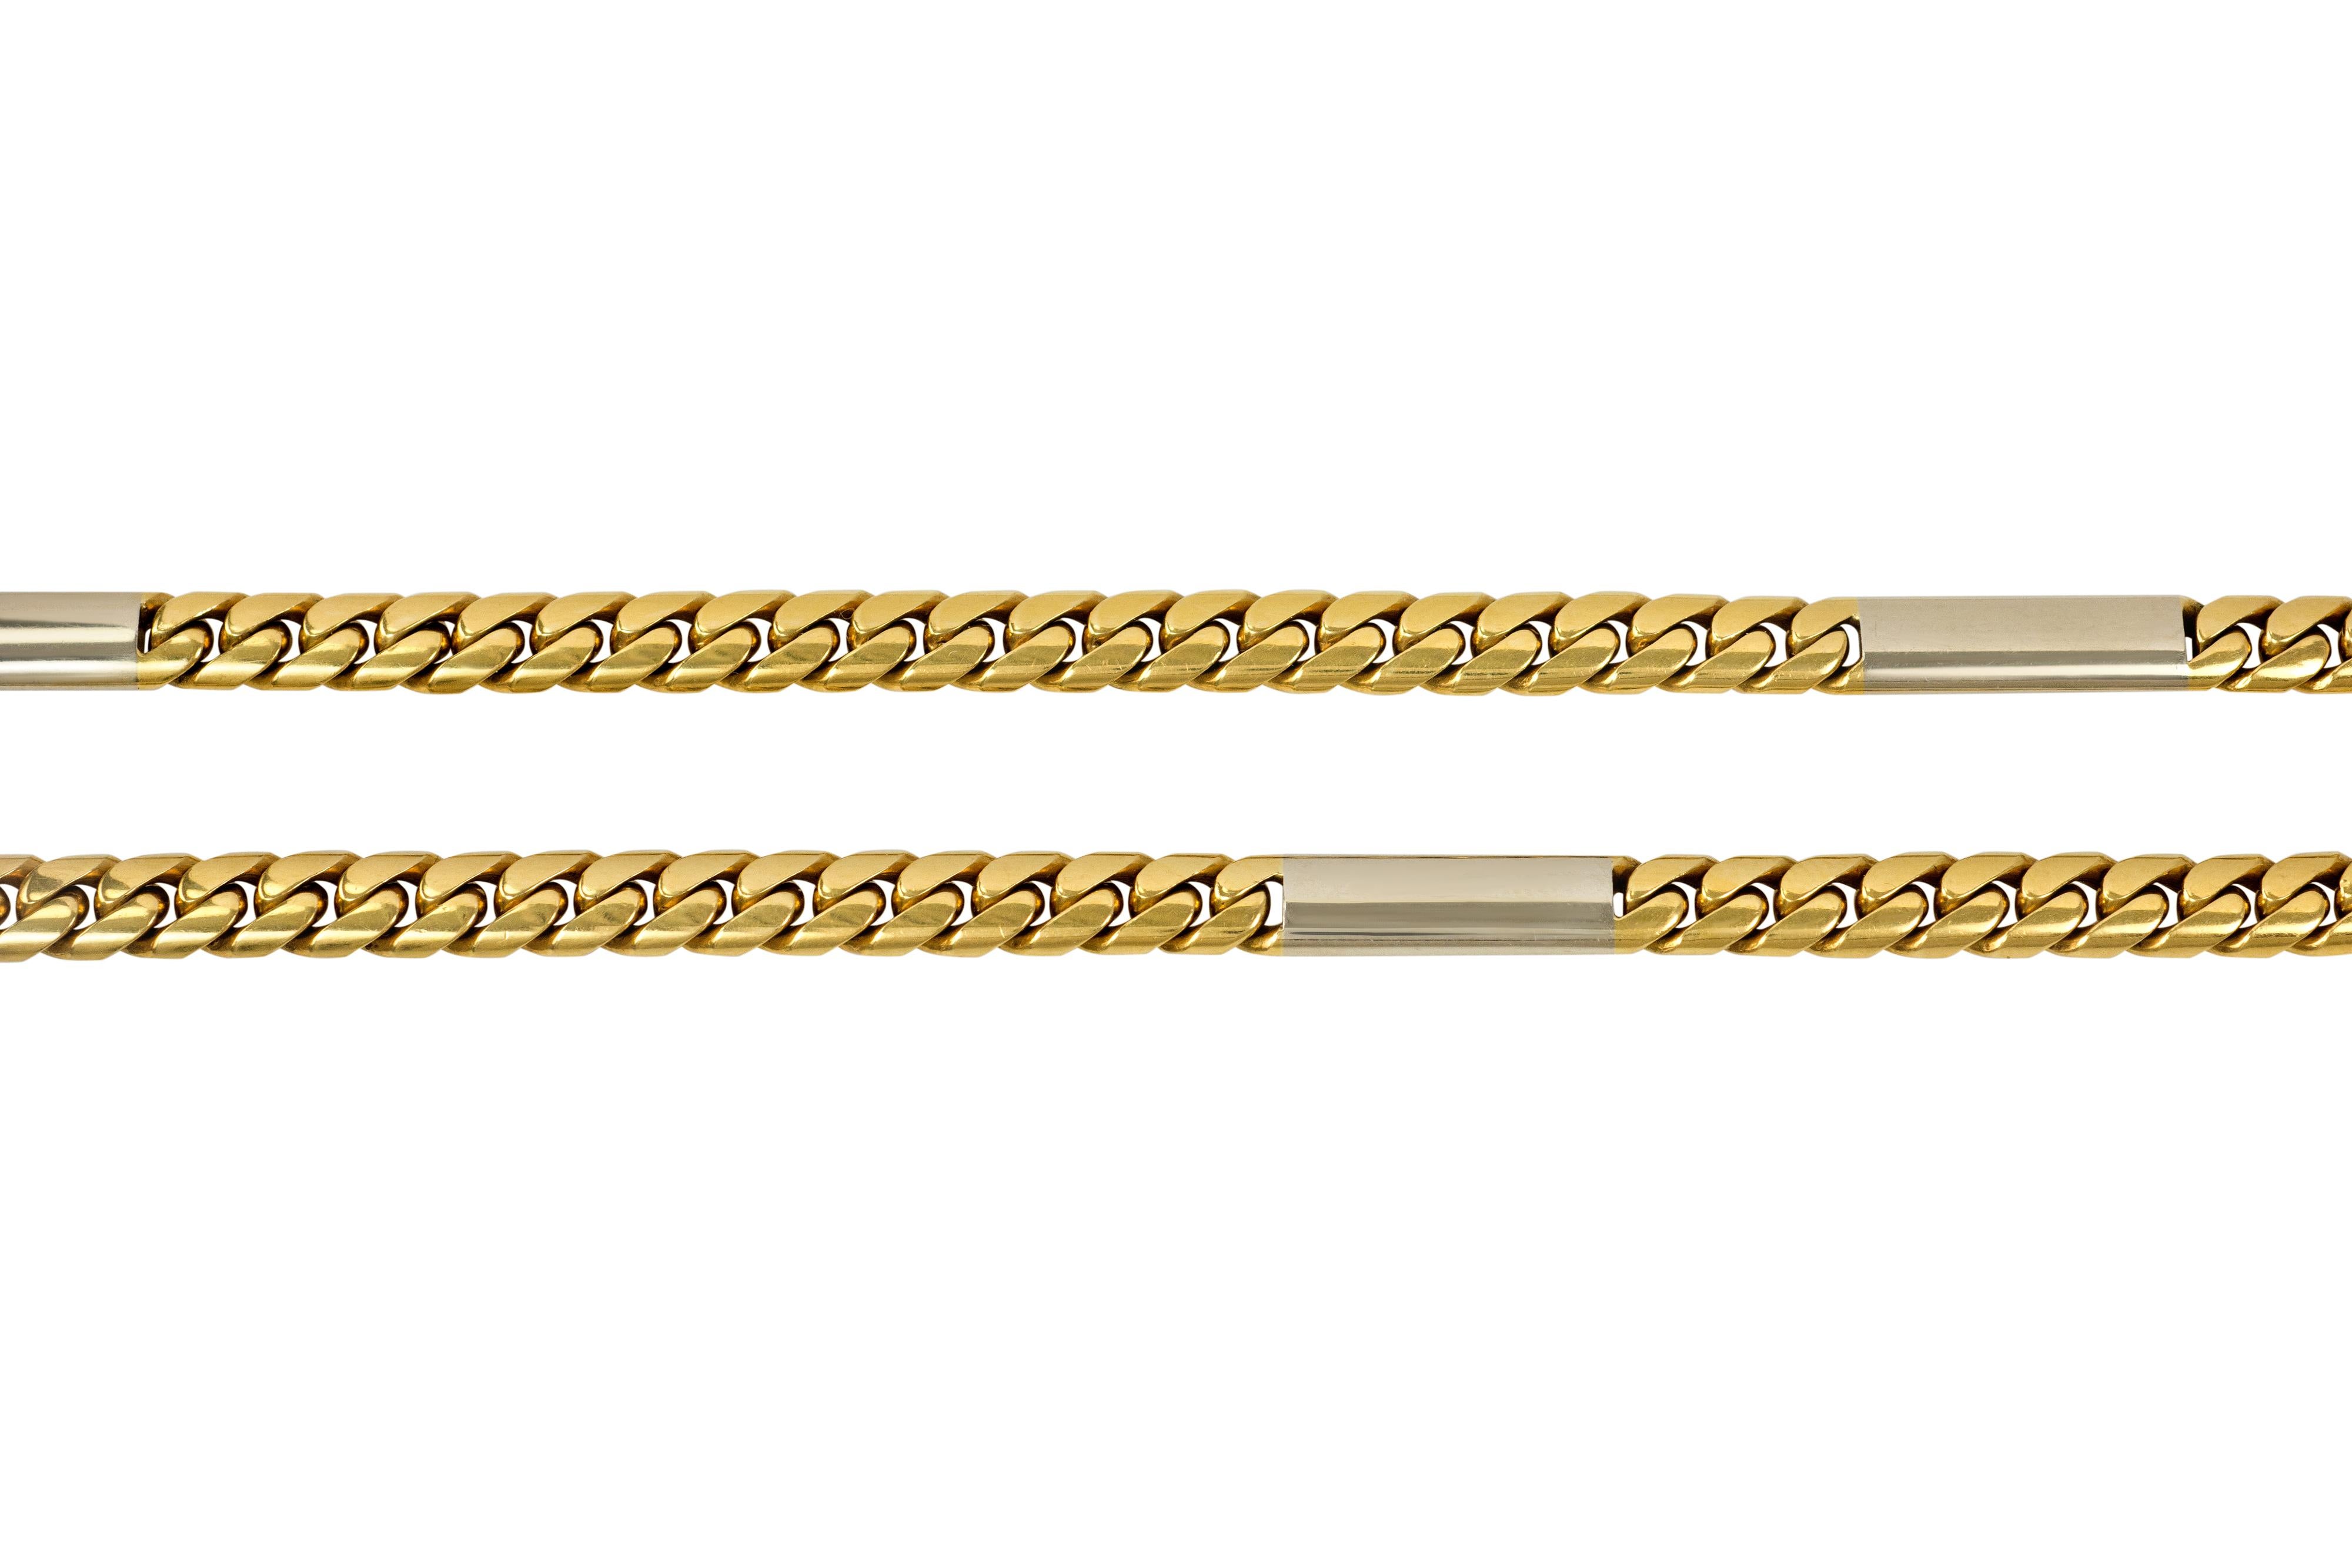 An 18 karat gold link chain, by Cartier. The design features yellow gold curb links, interspersed with 4 white gold I.D. bars. The bars would make an excellent surface for engraving.

Chain is signed Cartier and numbered 54520.